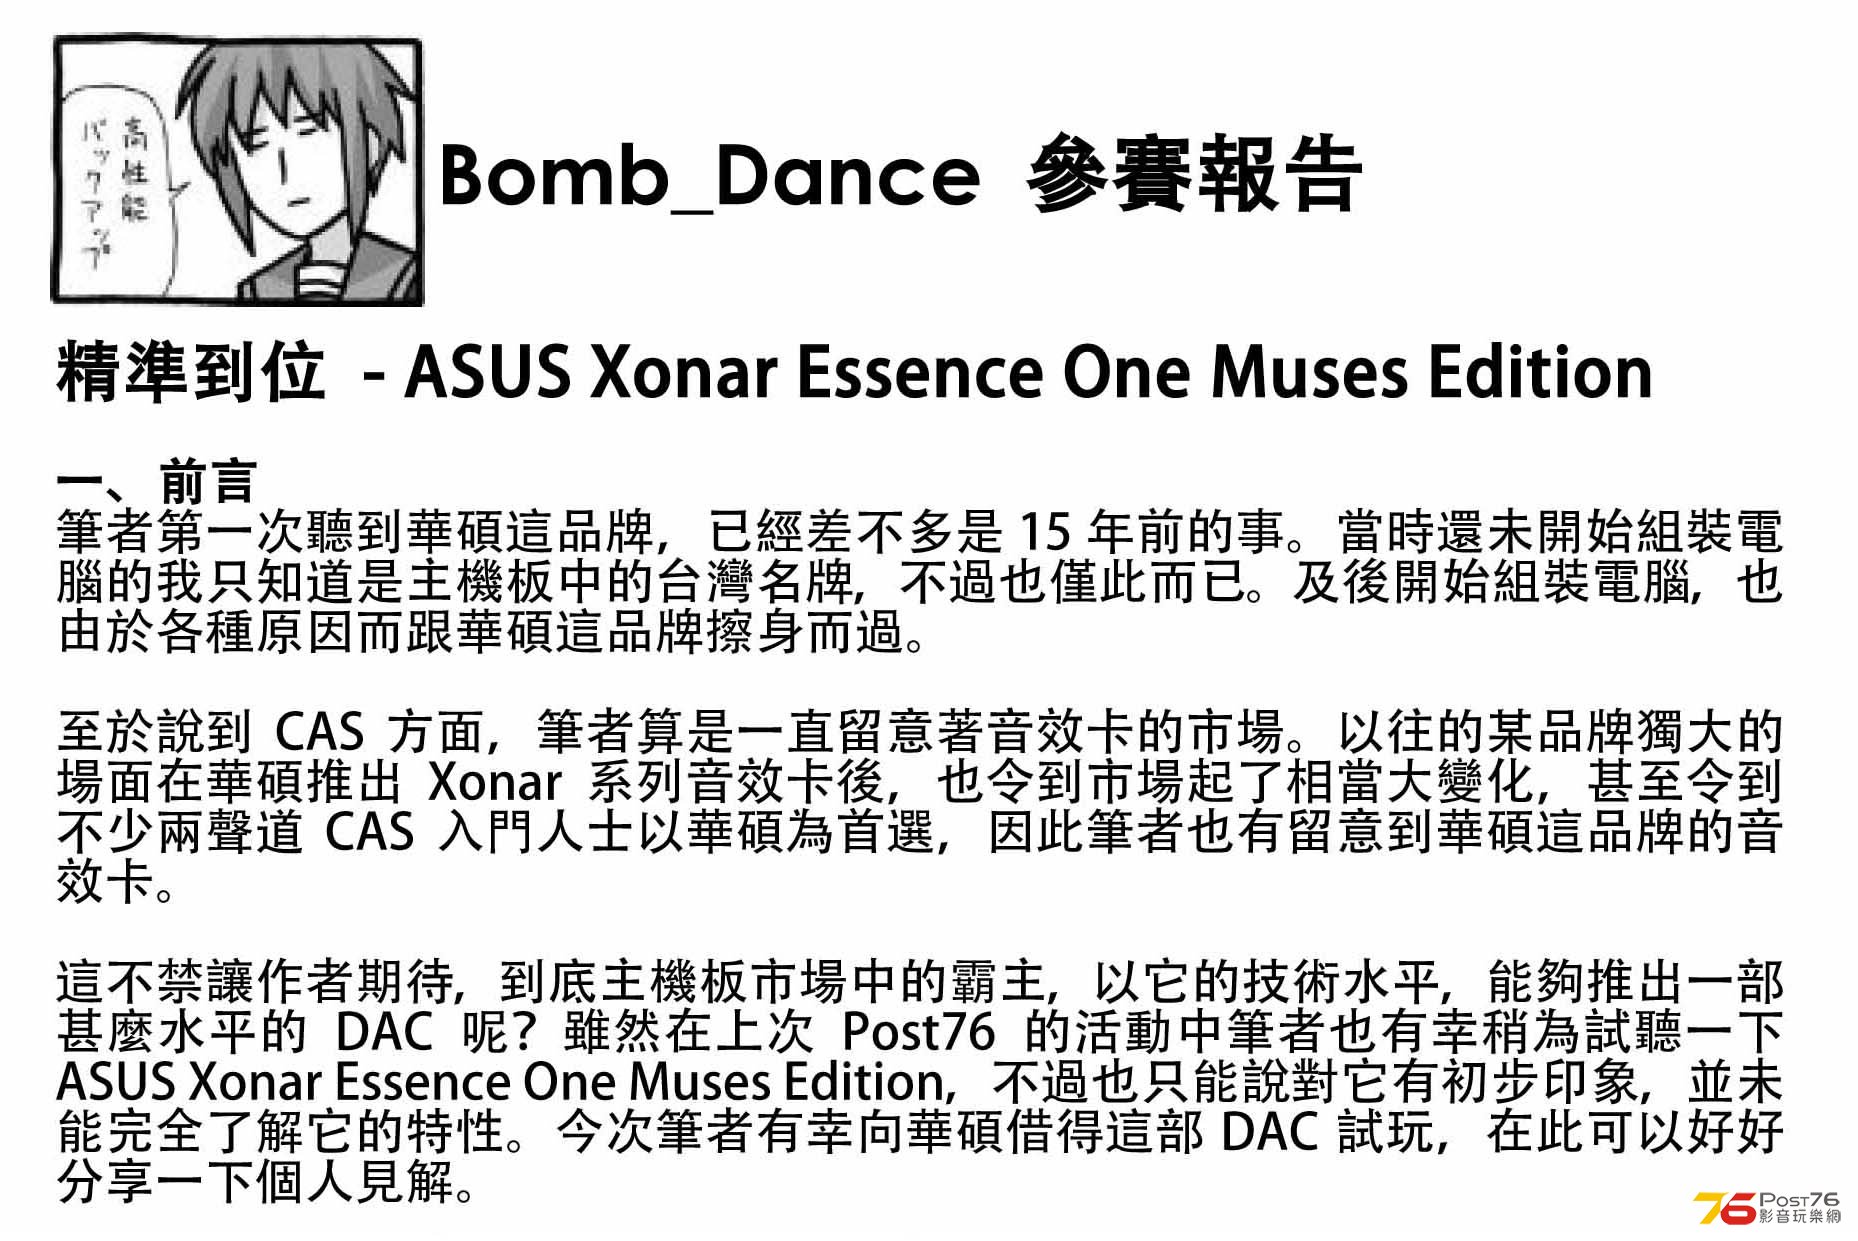 ASUS DAC Review  (Bomb_Dance 參賽報告) Index.jpg